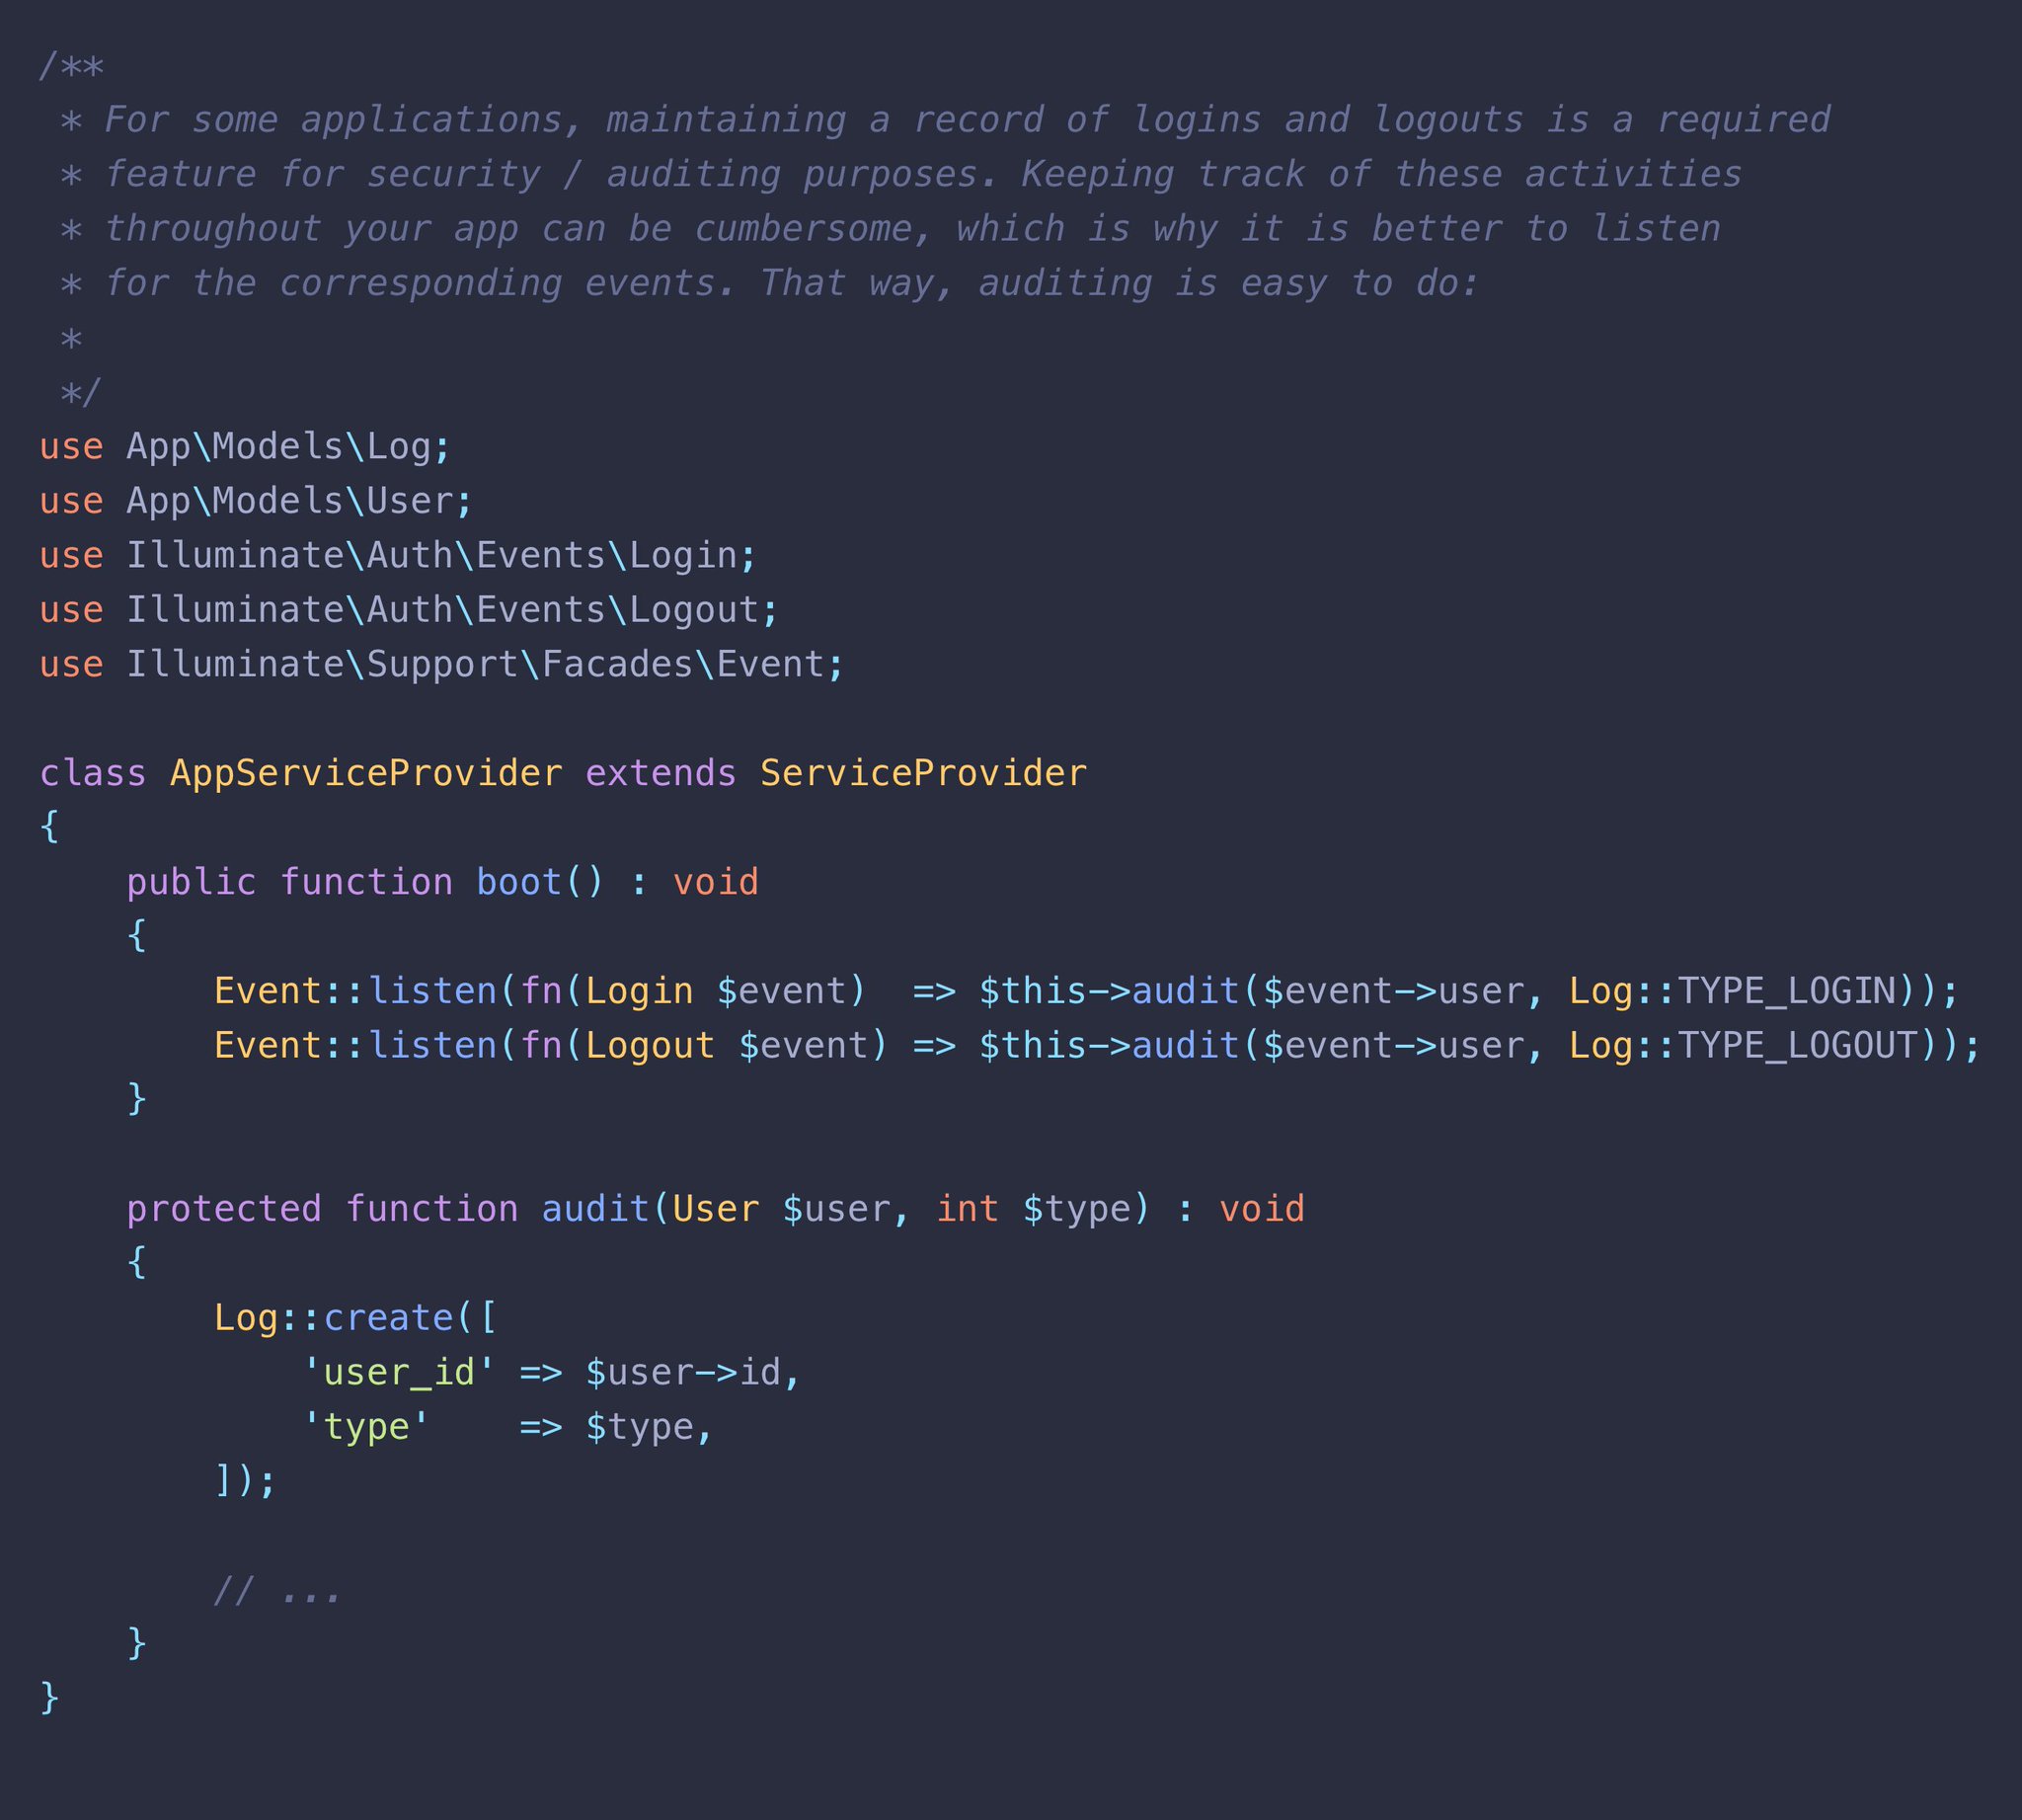 You can track logins and logouts for auditing purposes using Laravel's native auth events